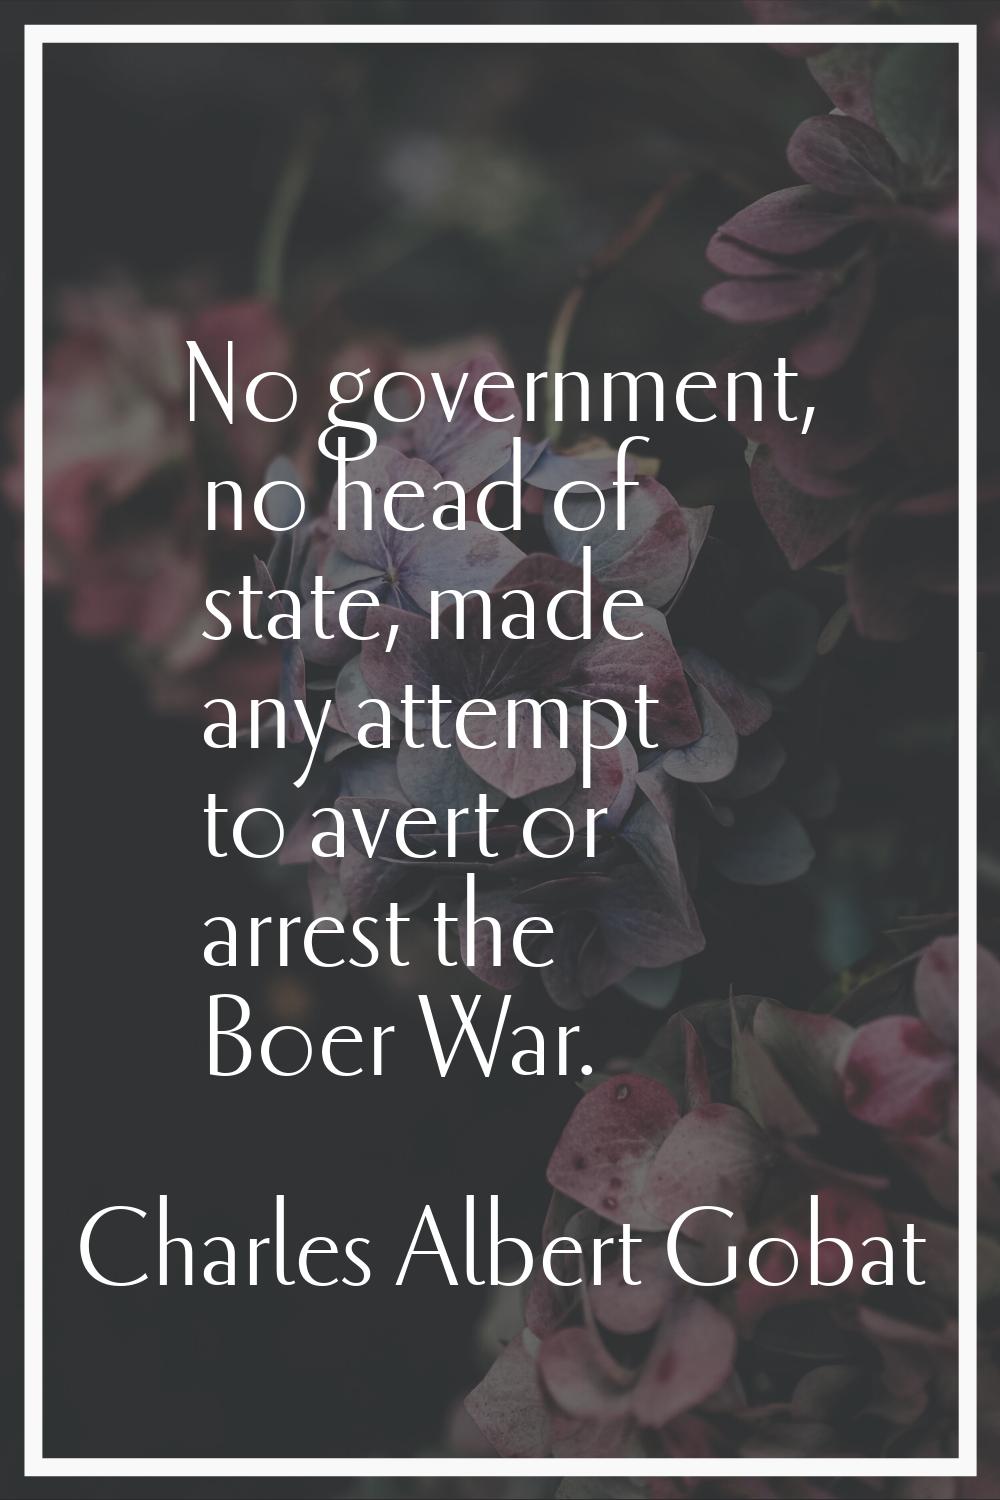 No government, no head of state, made any attempt to avert or arrest the Boer War.